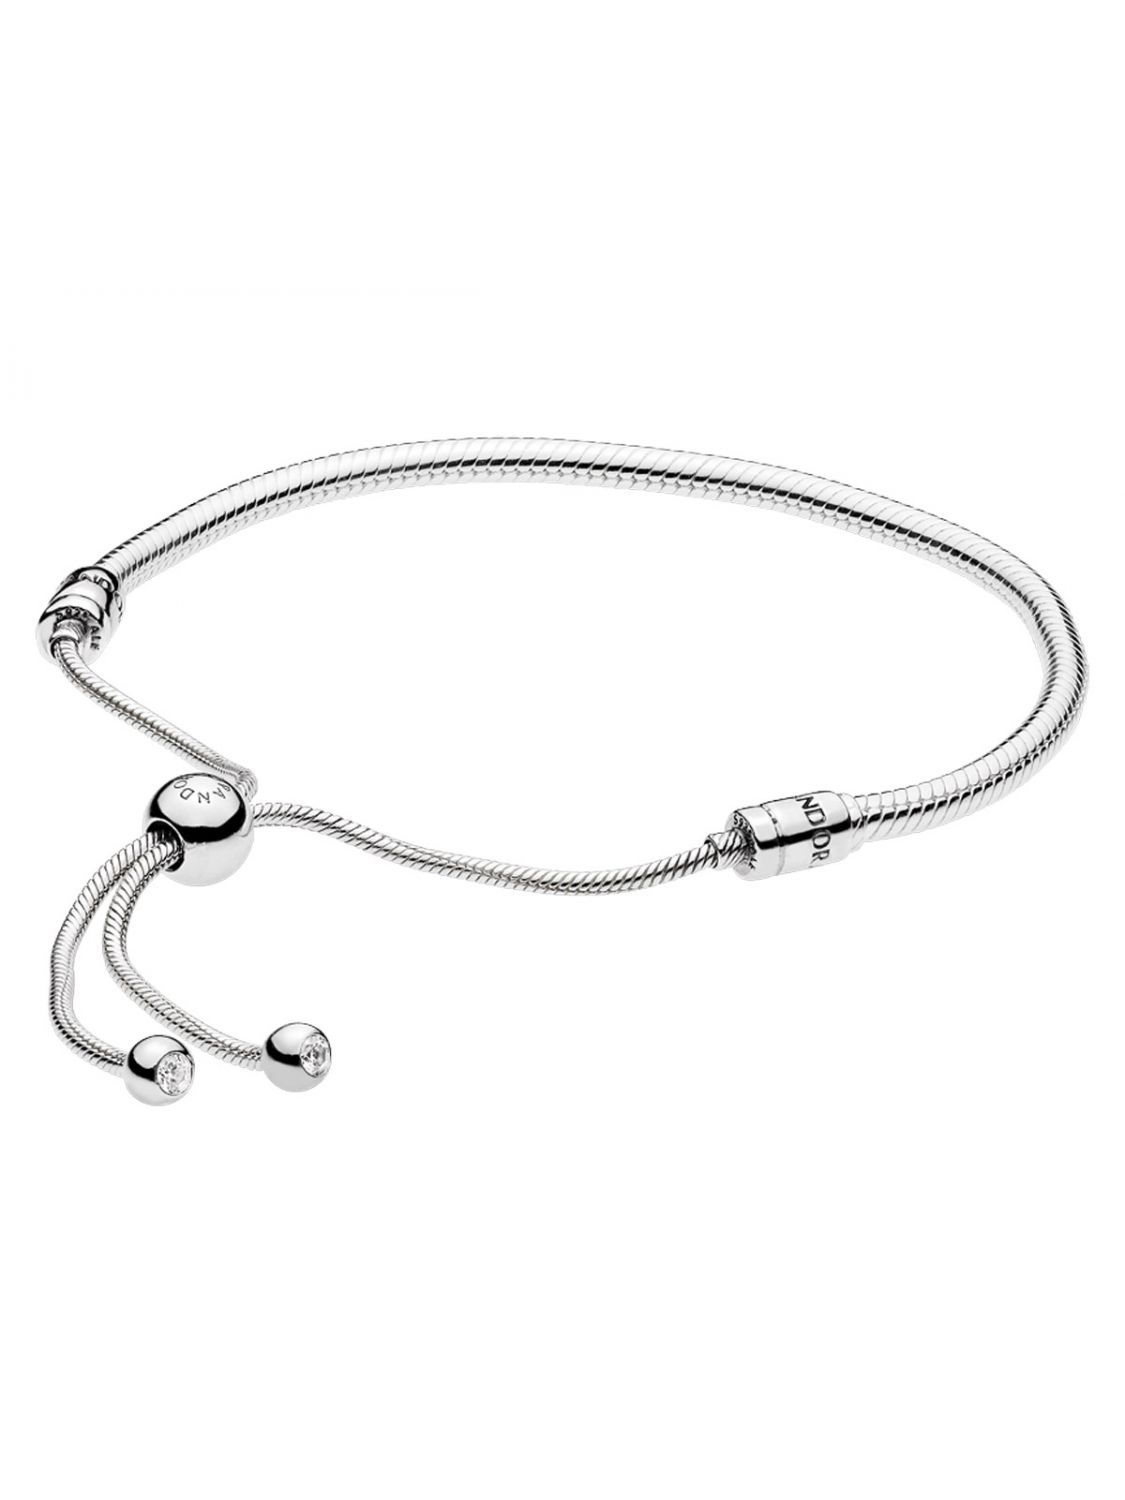 Pandora 597125cz Armband Moments Silver Sliding In Current Pandora Moments Small O Pendant Necklaces (View 11 of 25)